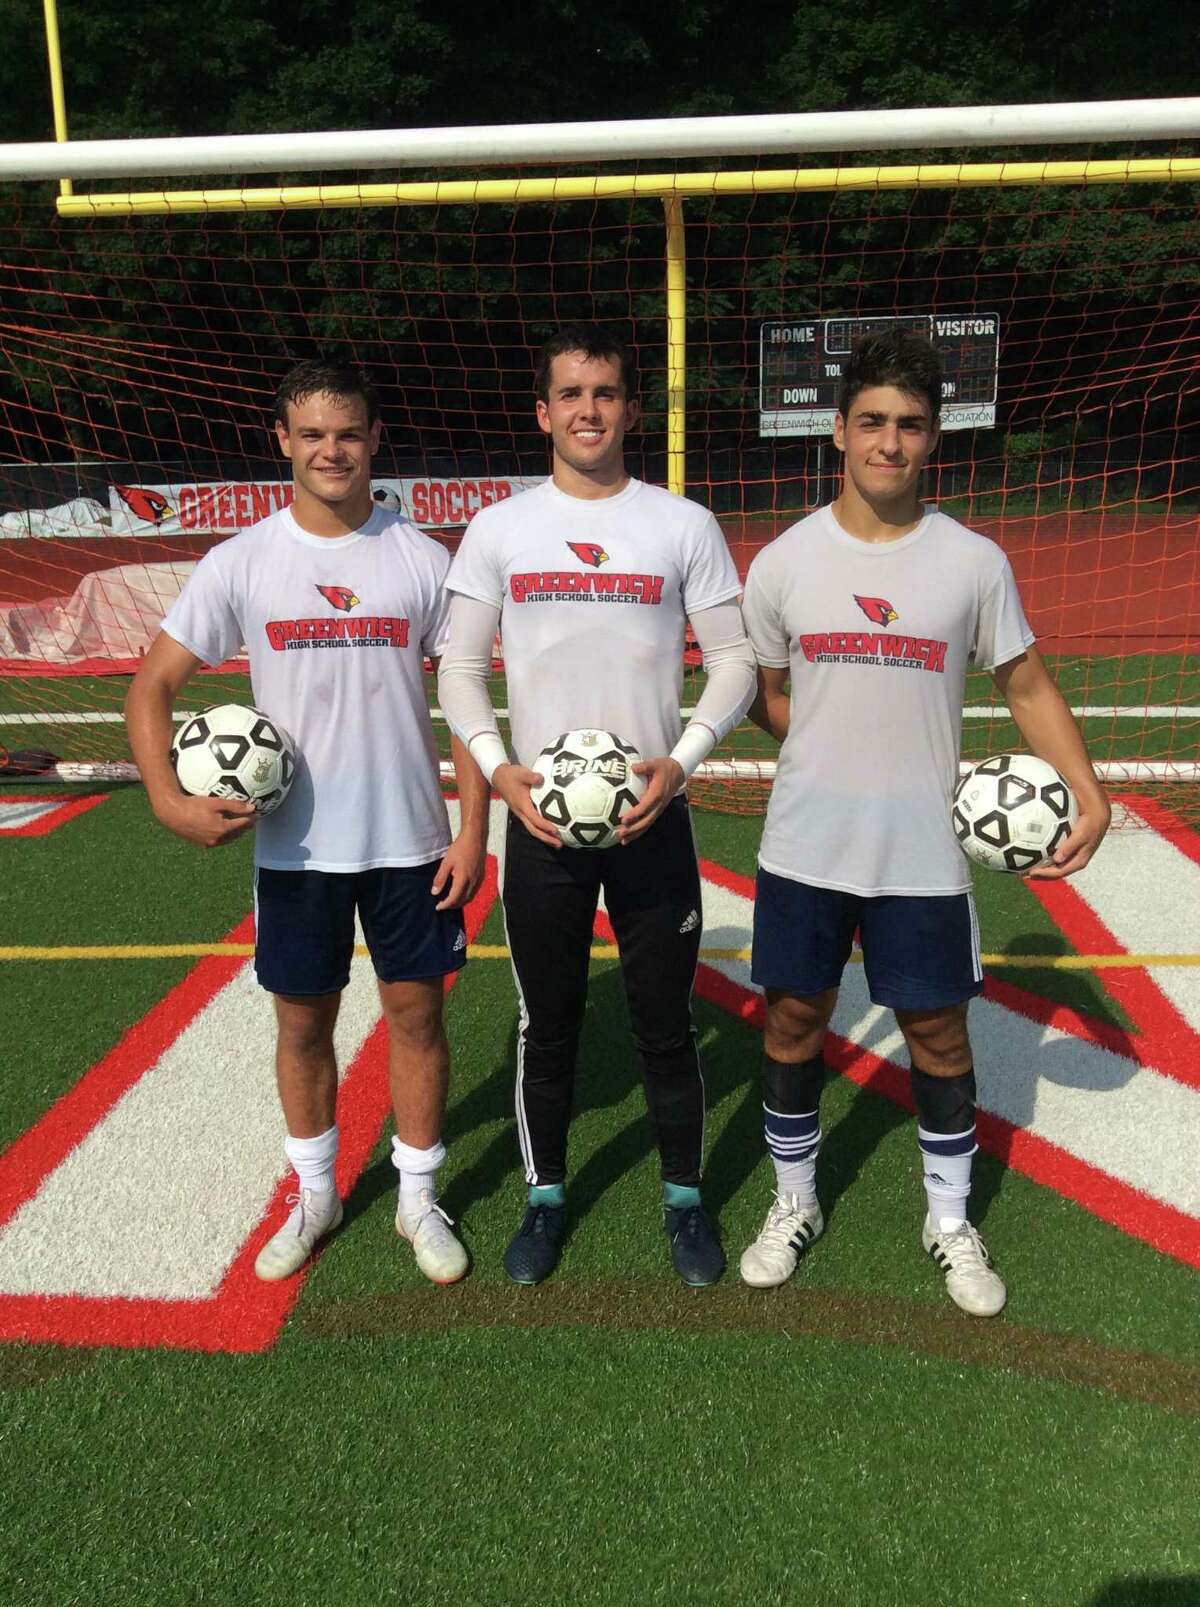 From left to right, Francisco Liguori, Jimmy Johnson and Ben Rifkin are senior captains of the Greenwich High School boys soccer team, which won the FCIAC championship in 2017.